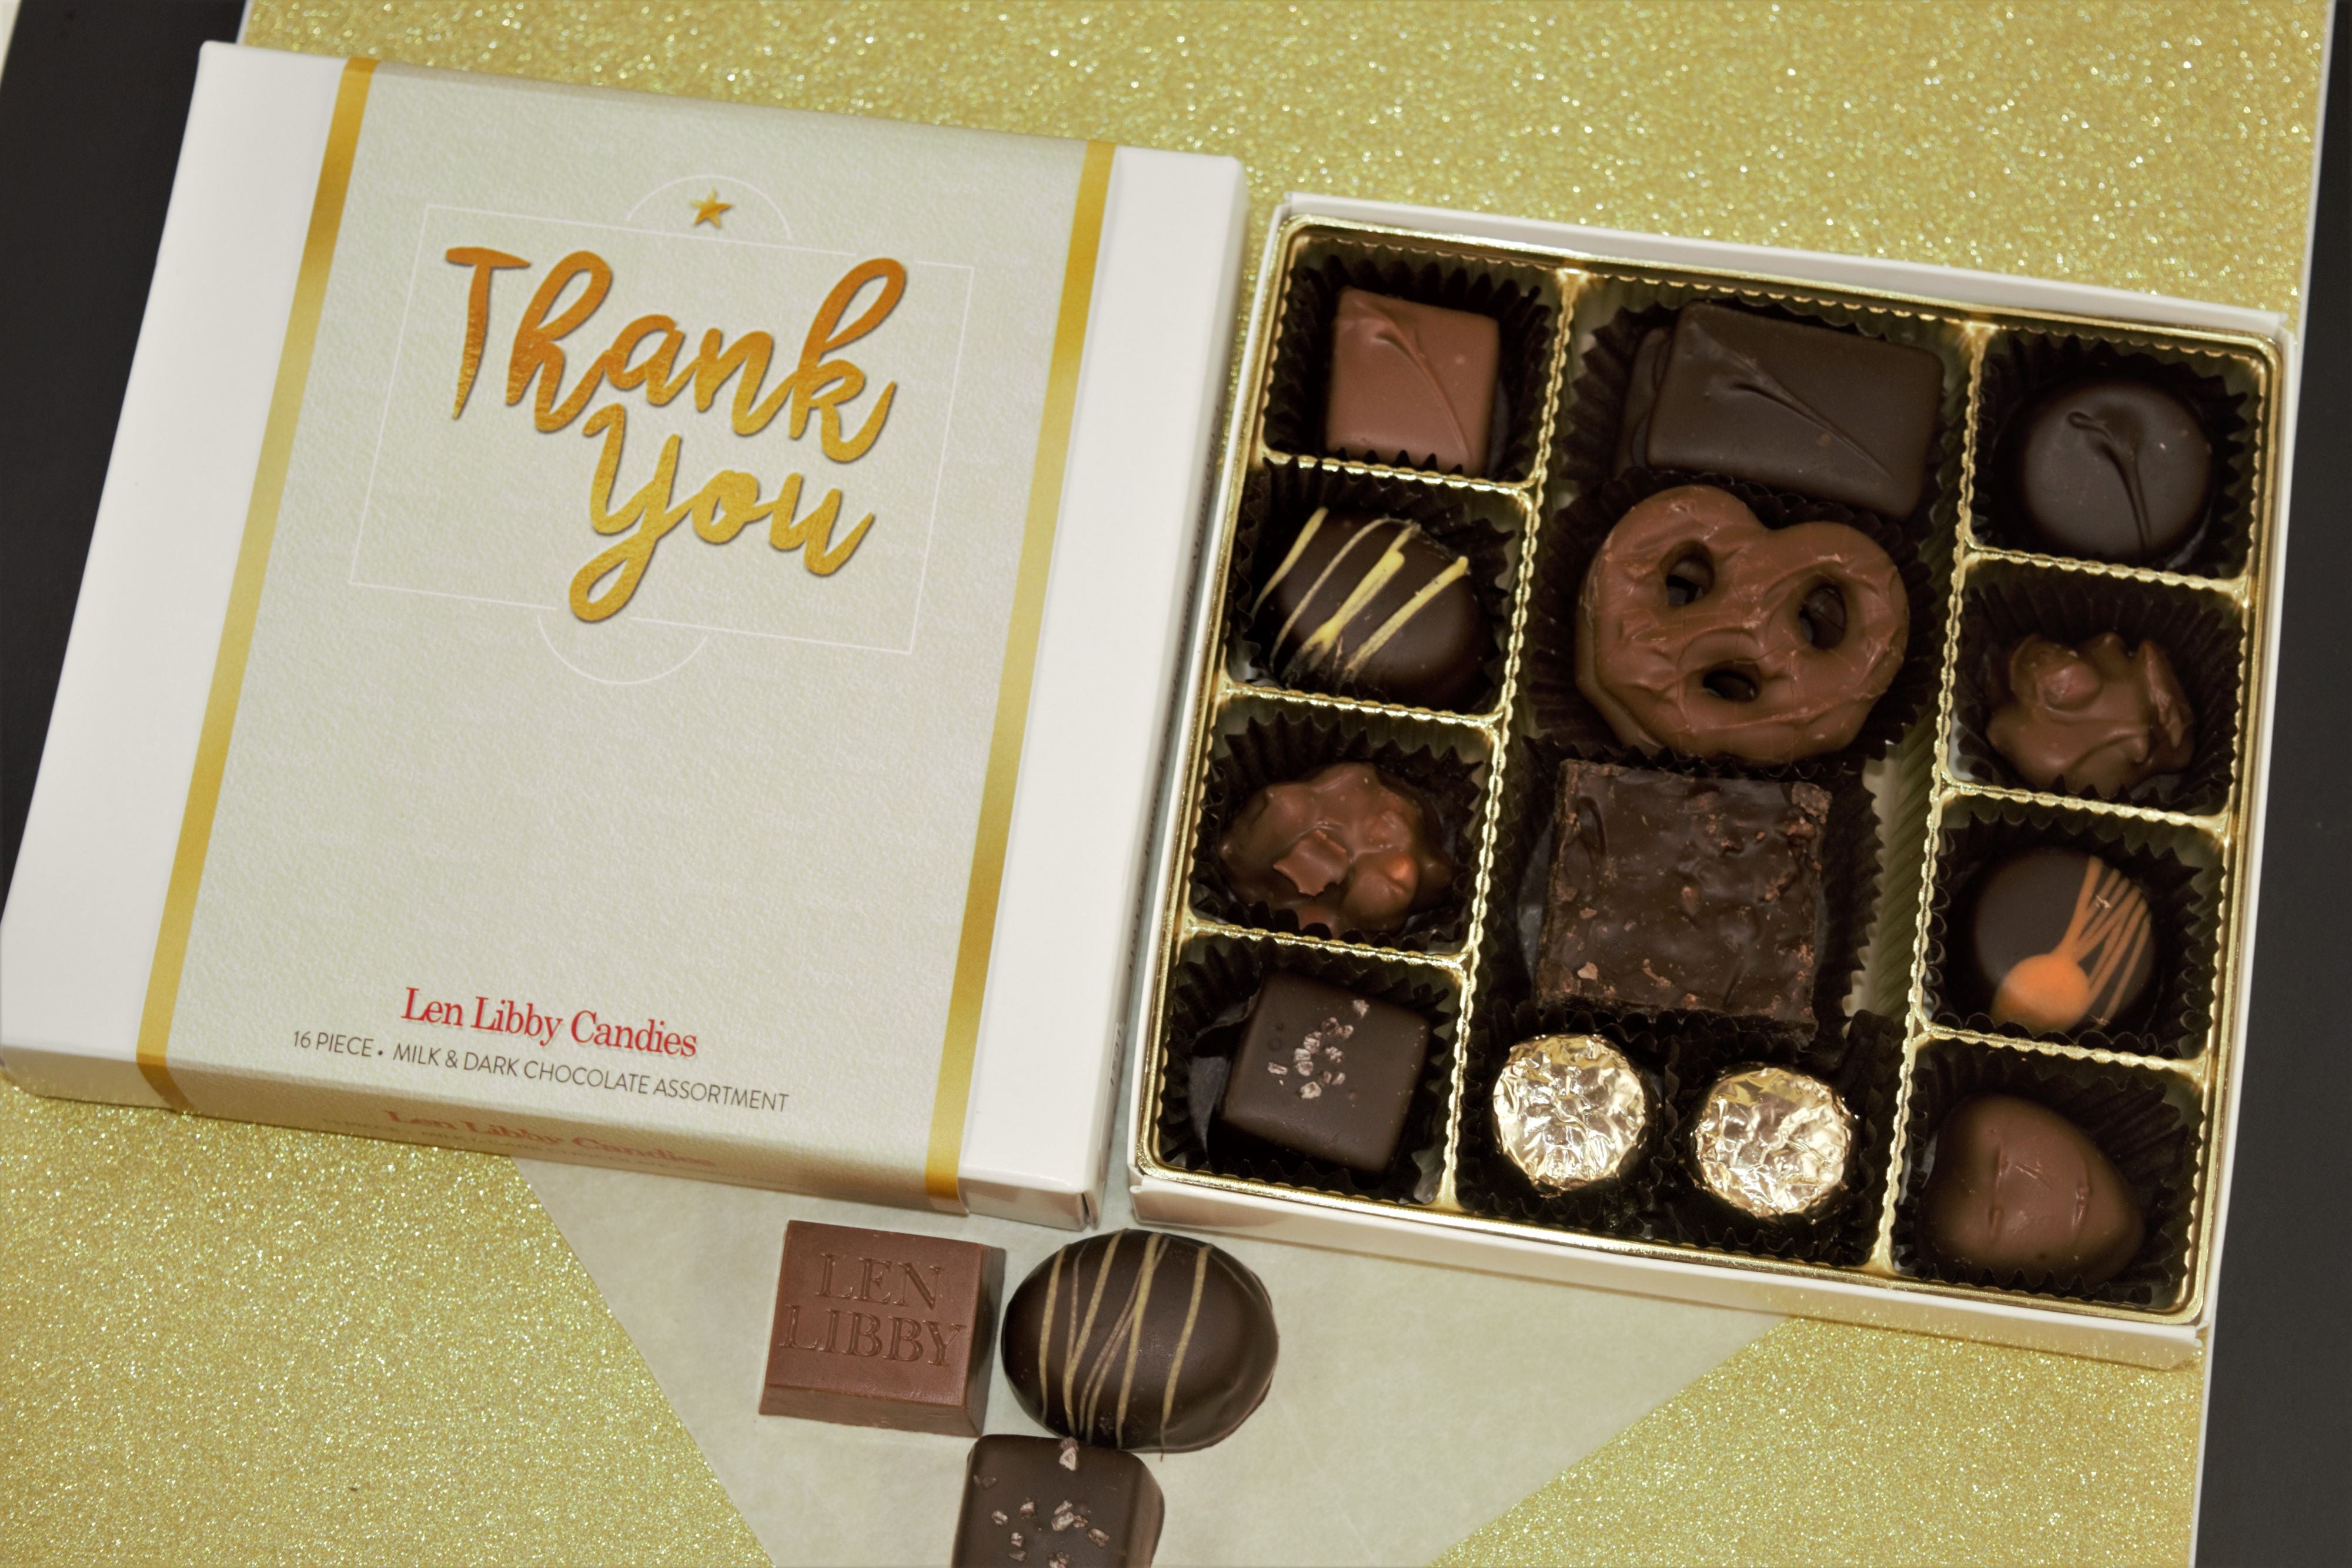 6pc or 16pc Signature Gift Box - Golden Thank You – Len Libby Candies